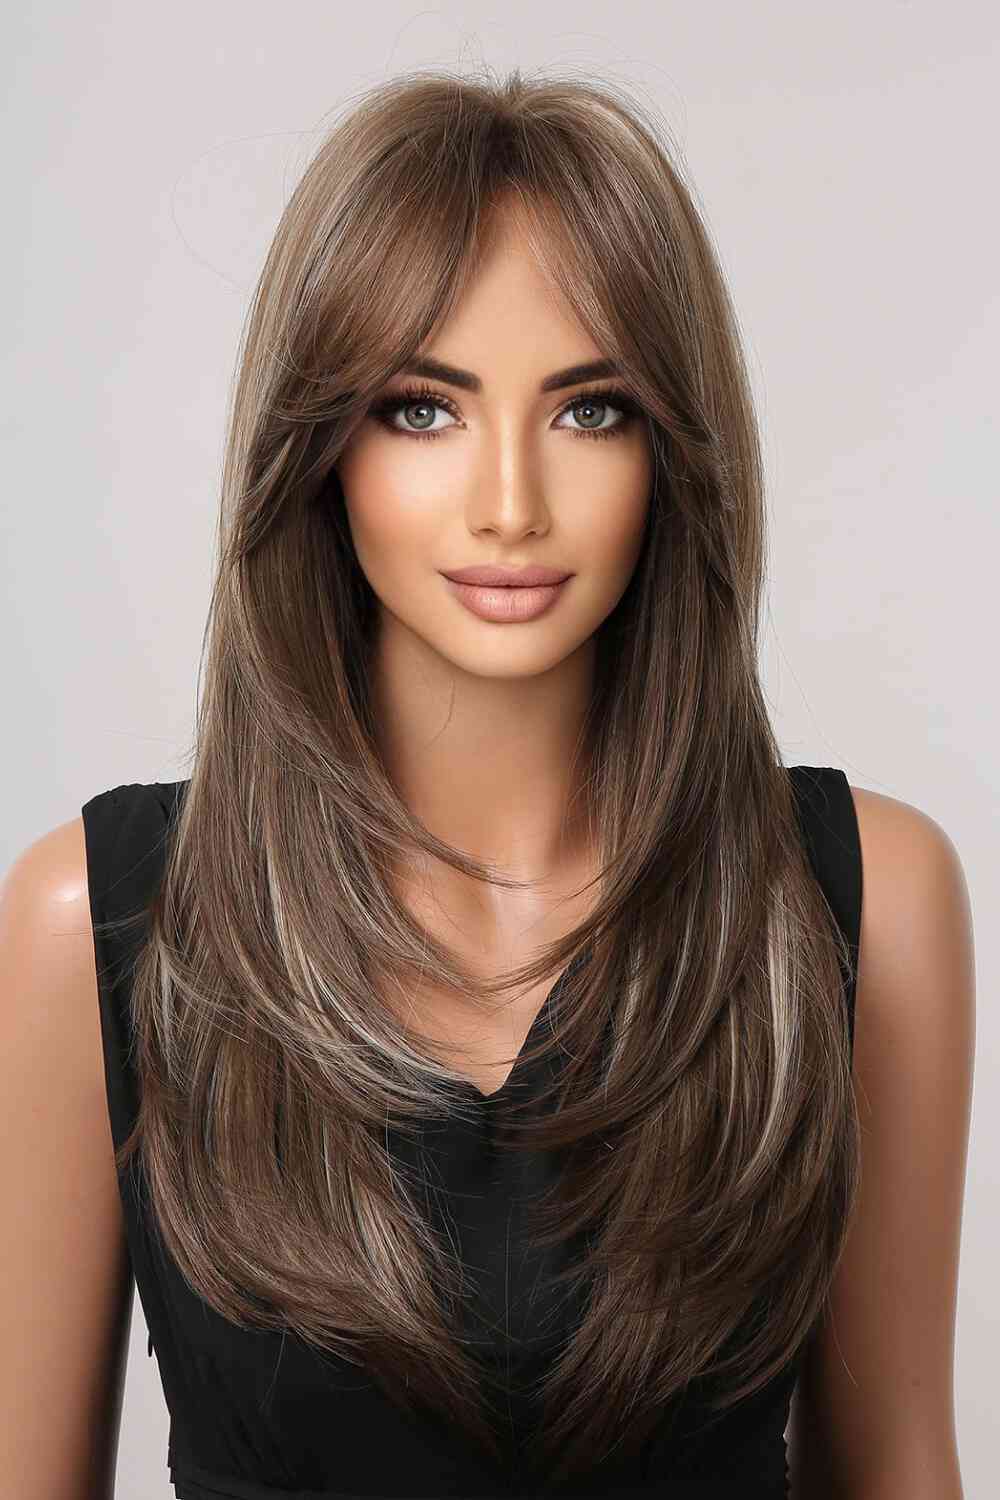 13*1" Full-Machine Wigs Synthetic Long Straight 22" Brown/Blonde Highlights One Size